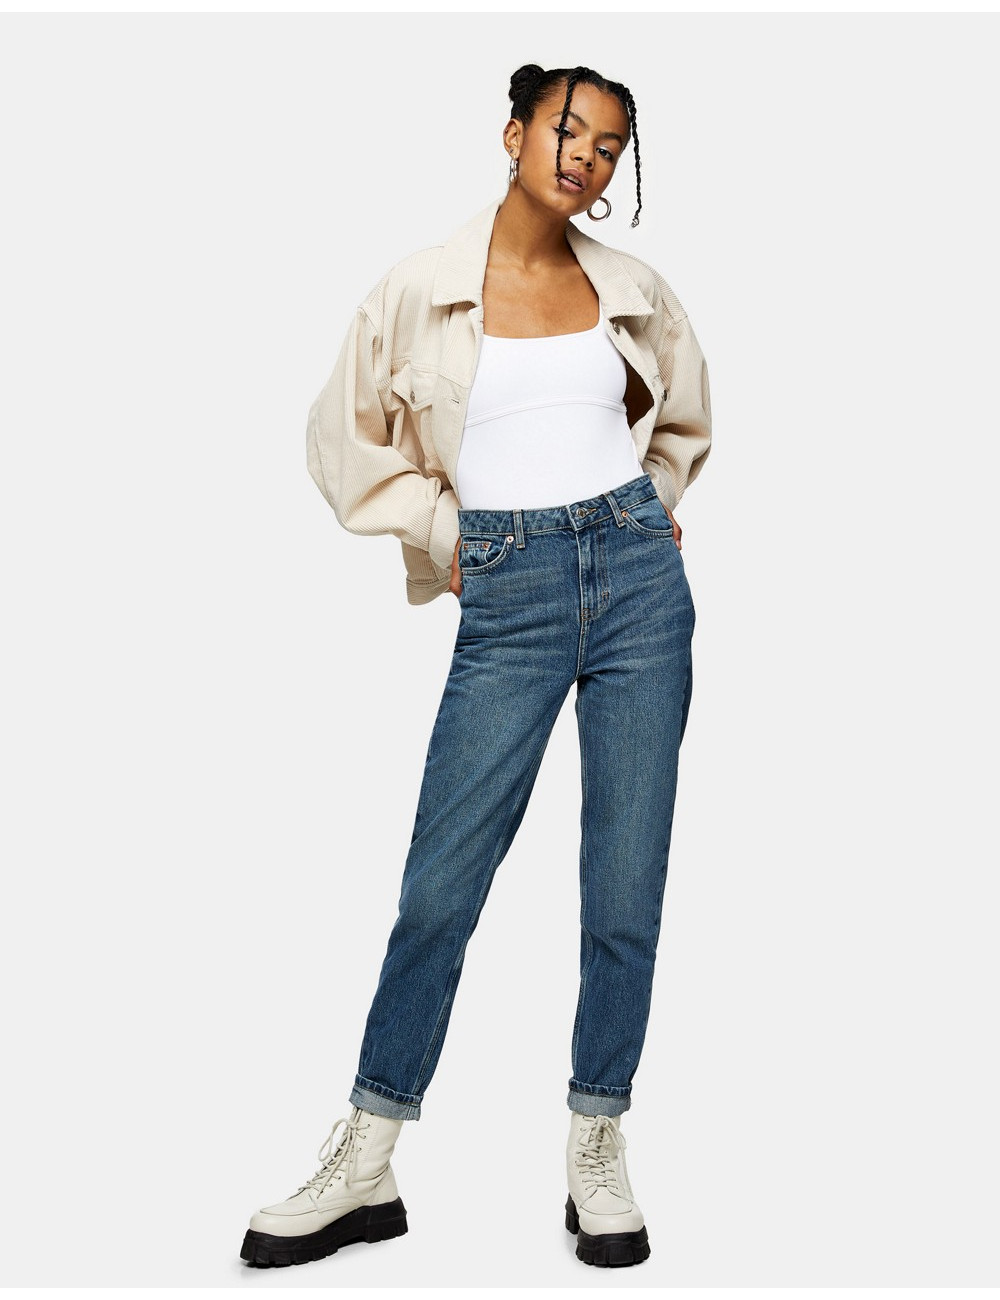 Topshop authentic mom jeans...